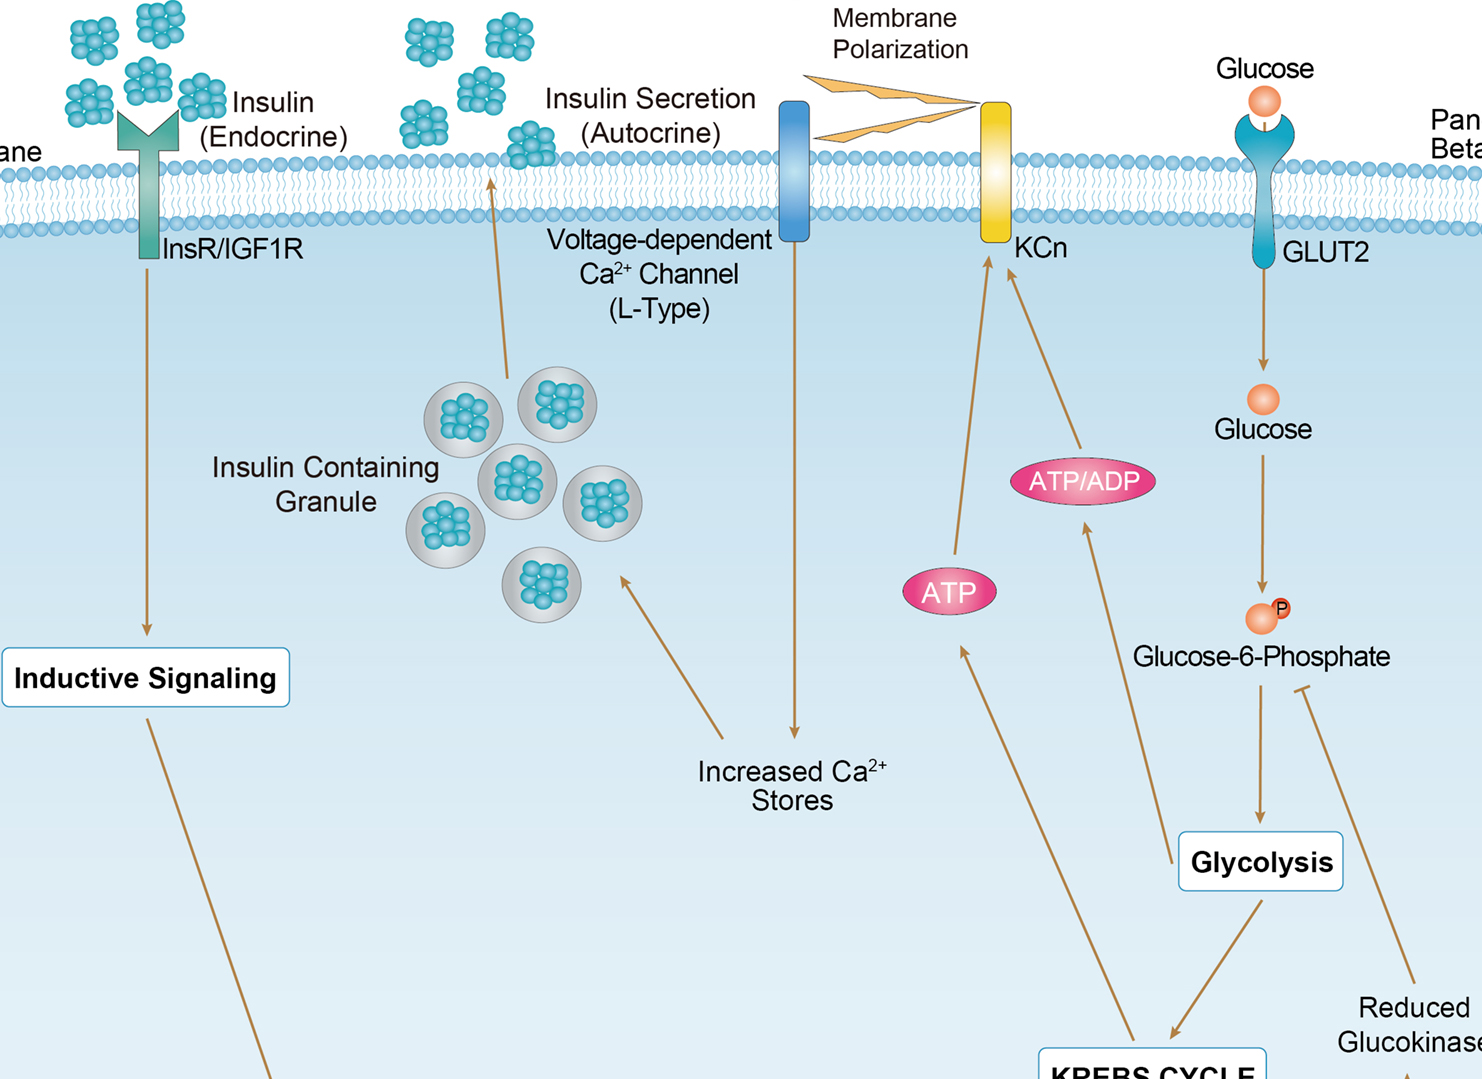 Maturity Onset Diabetes of the Young Overview - Pathways, Diagnosis, Targeted Therapies